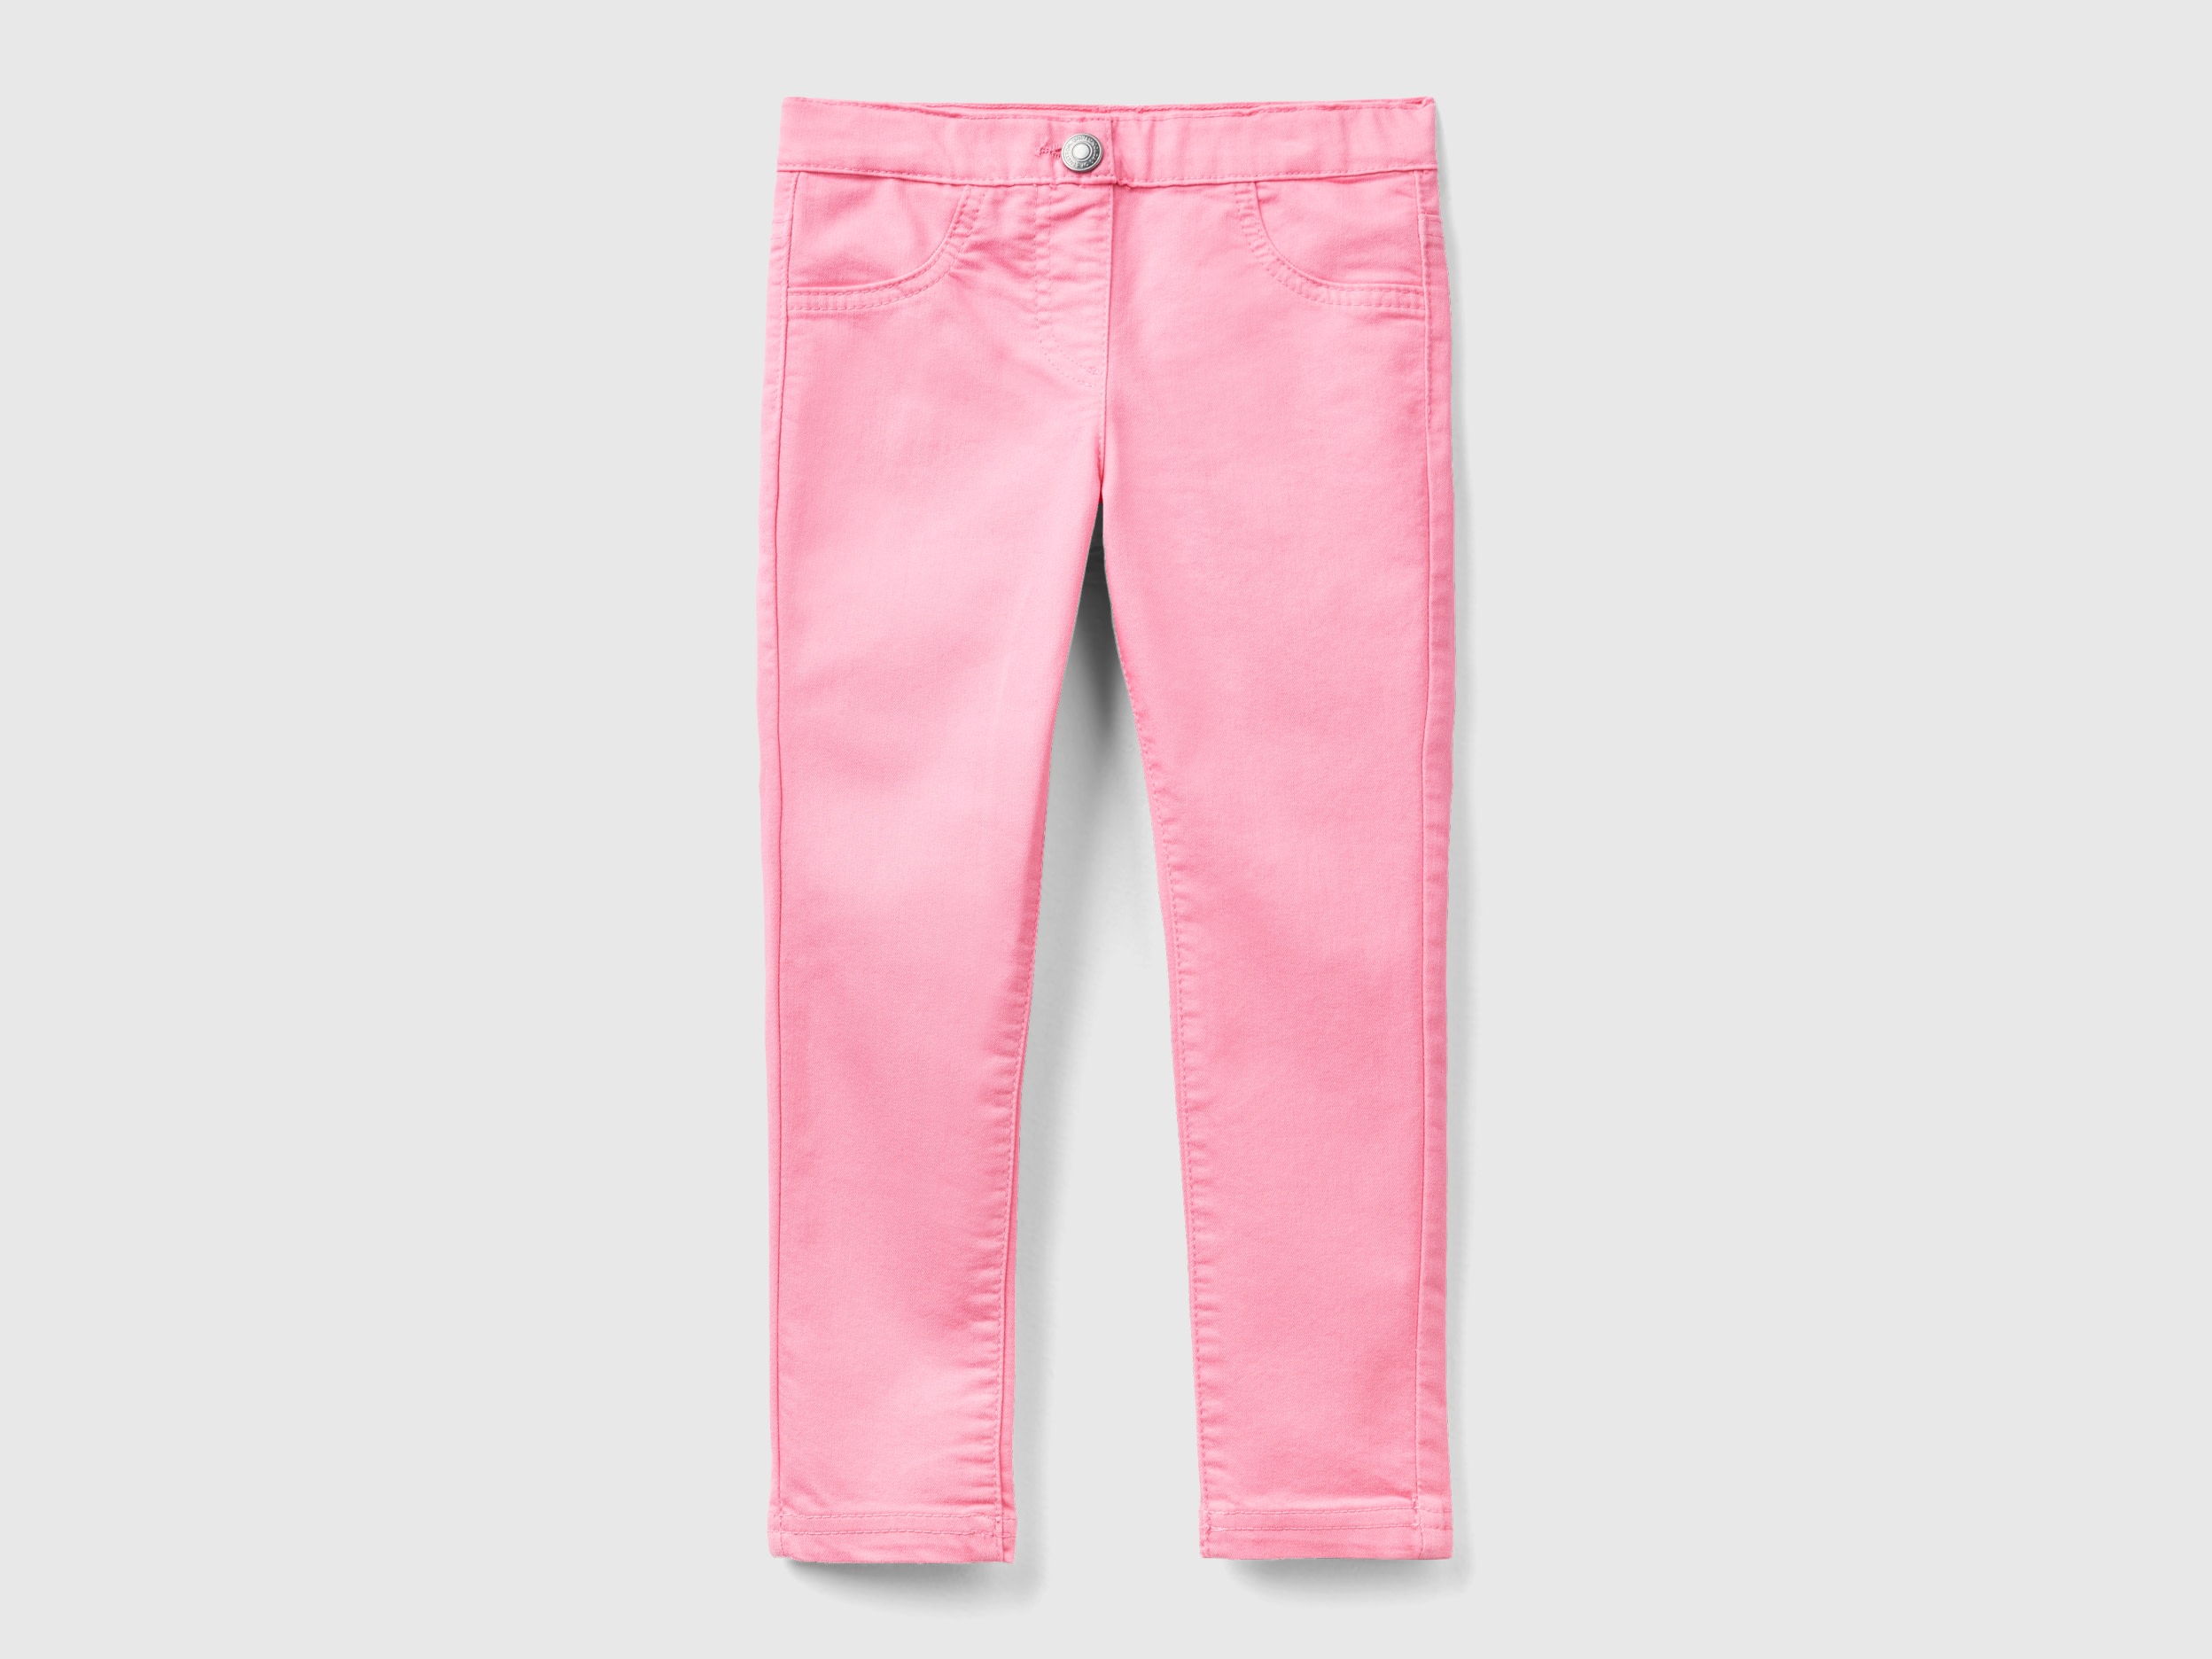 Benetton, Jeggings In Stretch Cotton Blend, size 4-5, Pink, Kids